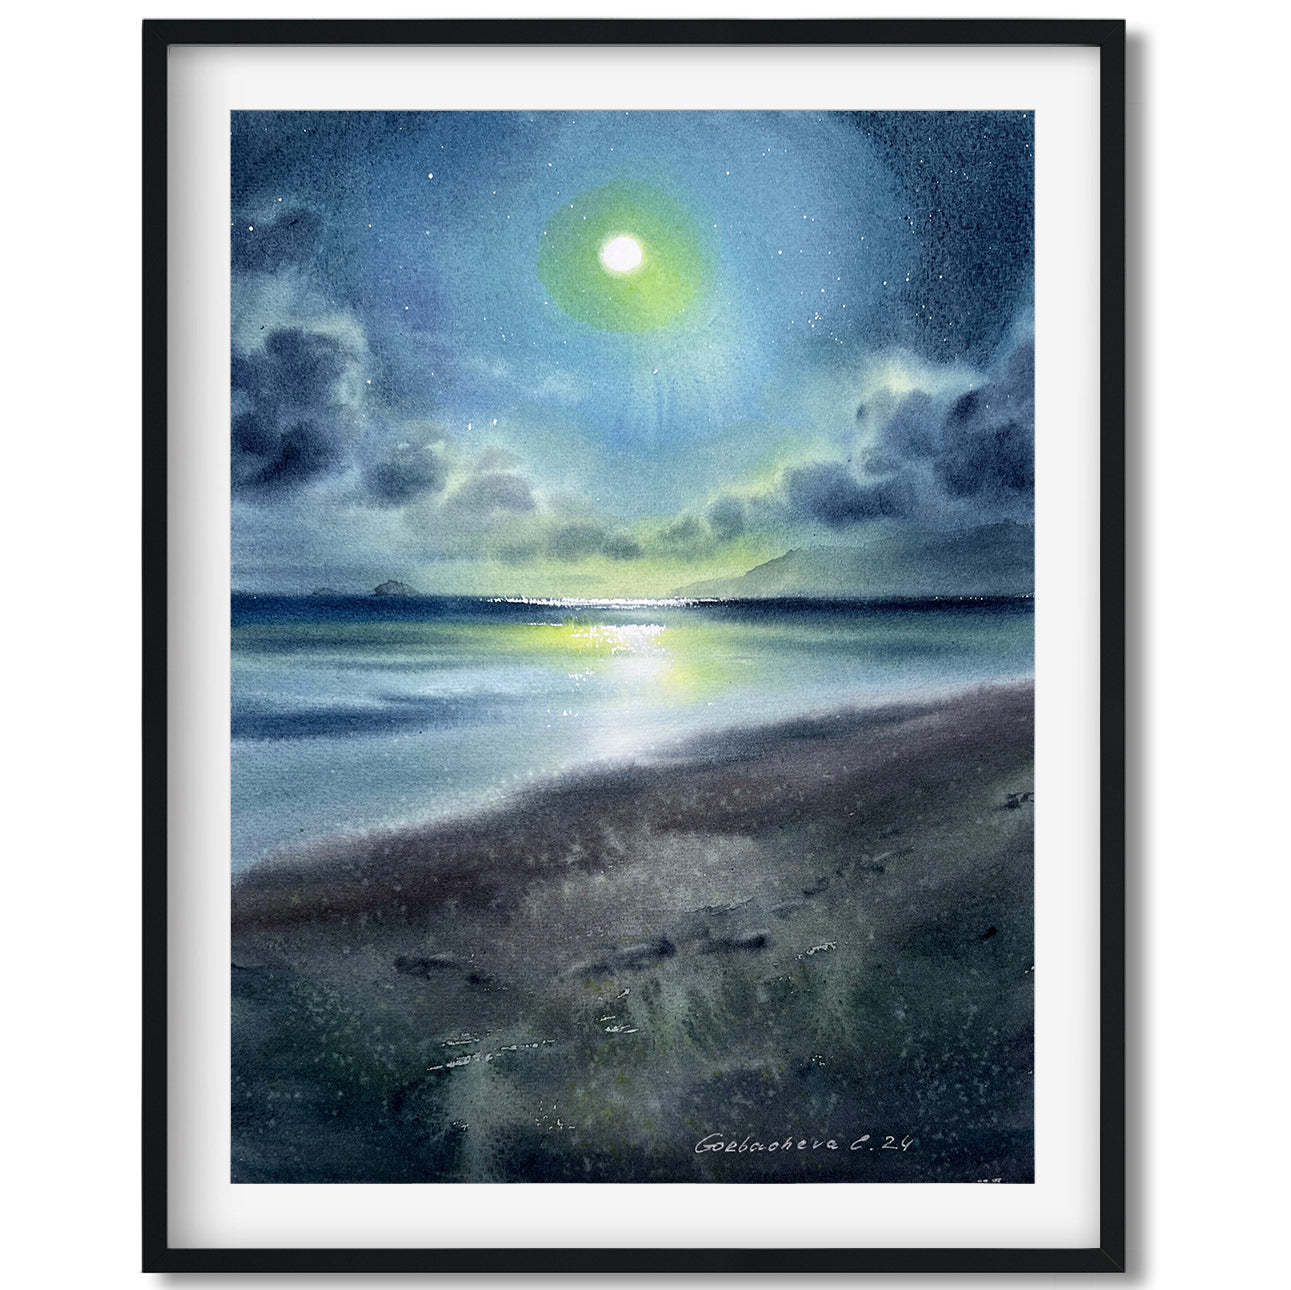 Nautical Wall Art 'In the Moonlight #8' Hand-Painted Seascape, 9x12 Ocean Scene for Coastal Decor, Art Collectors Gift Idea